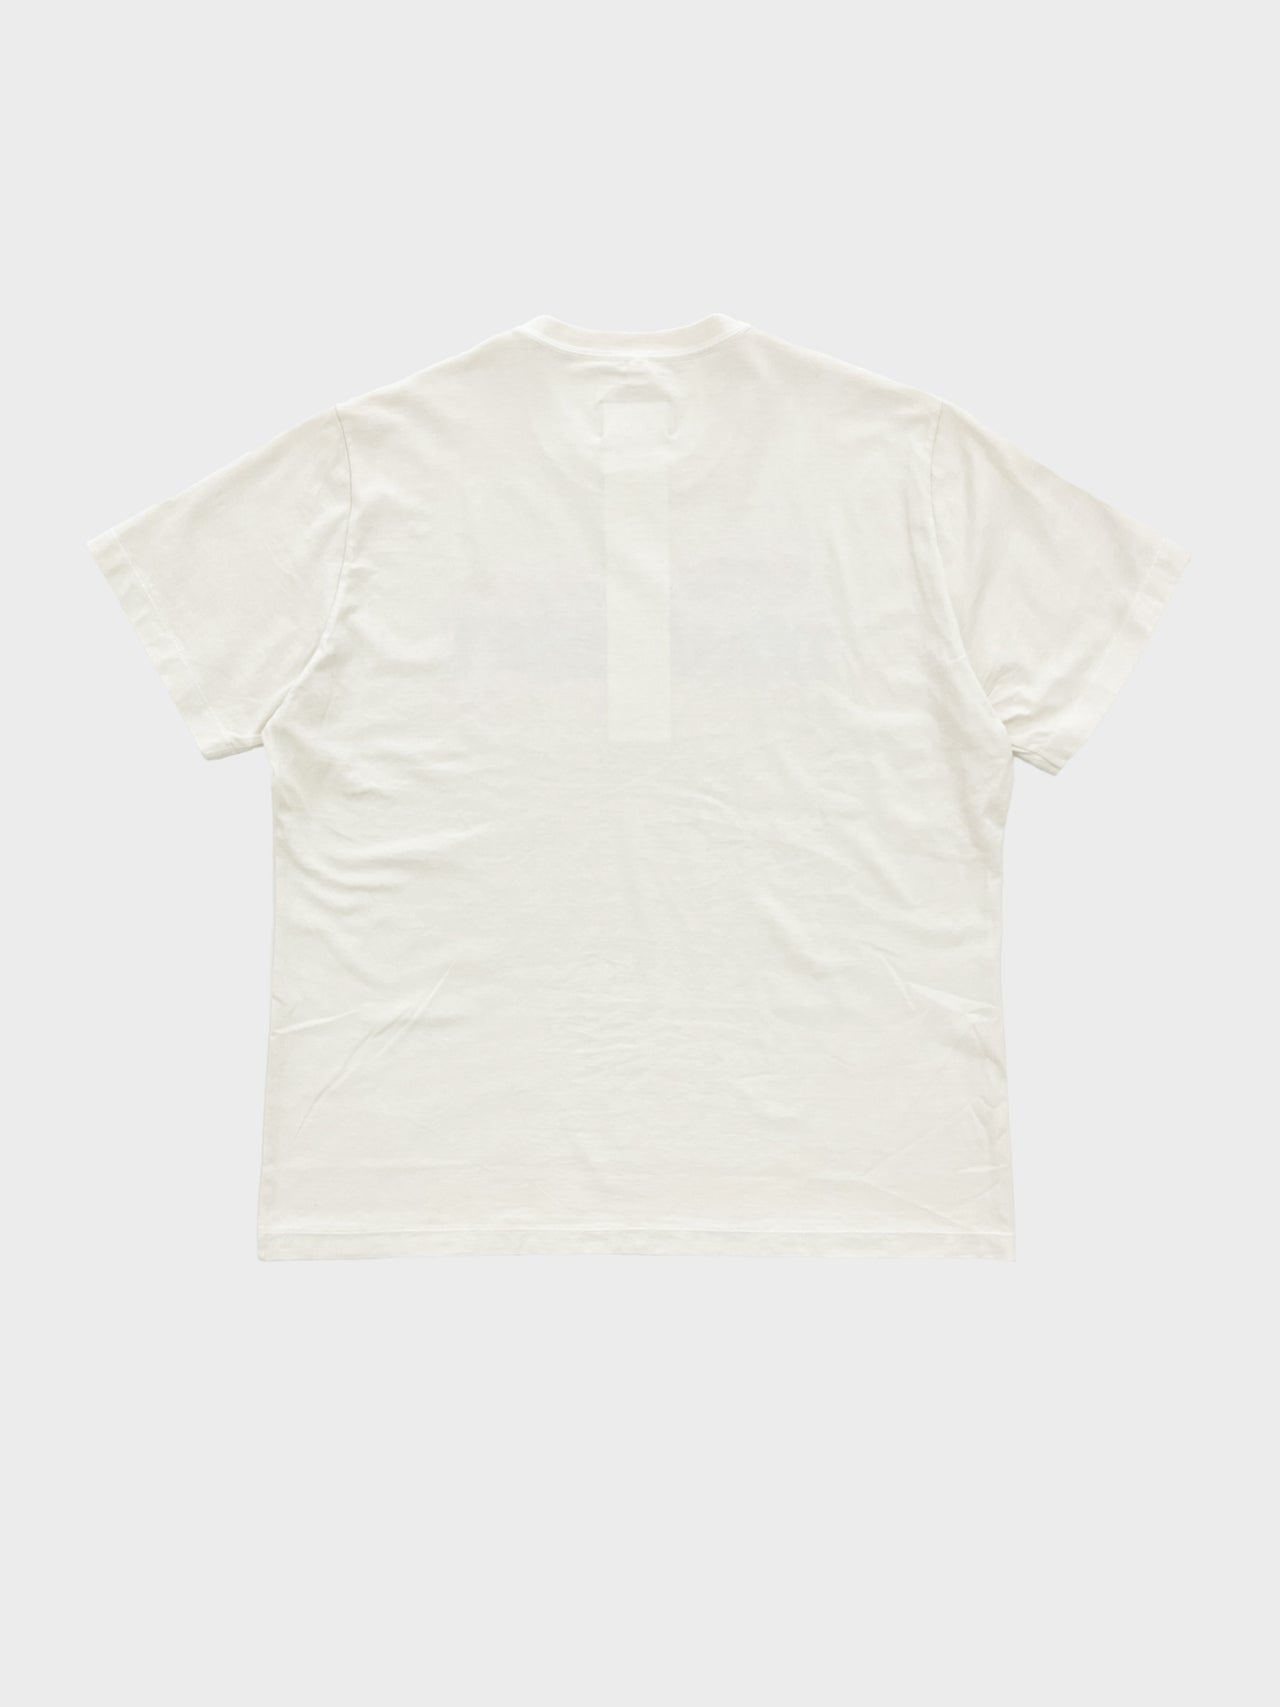 doublet / AI-GENERATED "DOUBLET" LOGO T-SHIRT (WHITE)